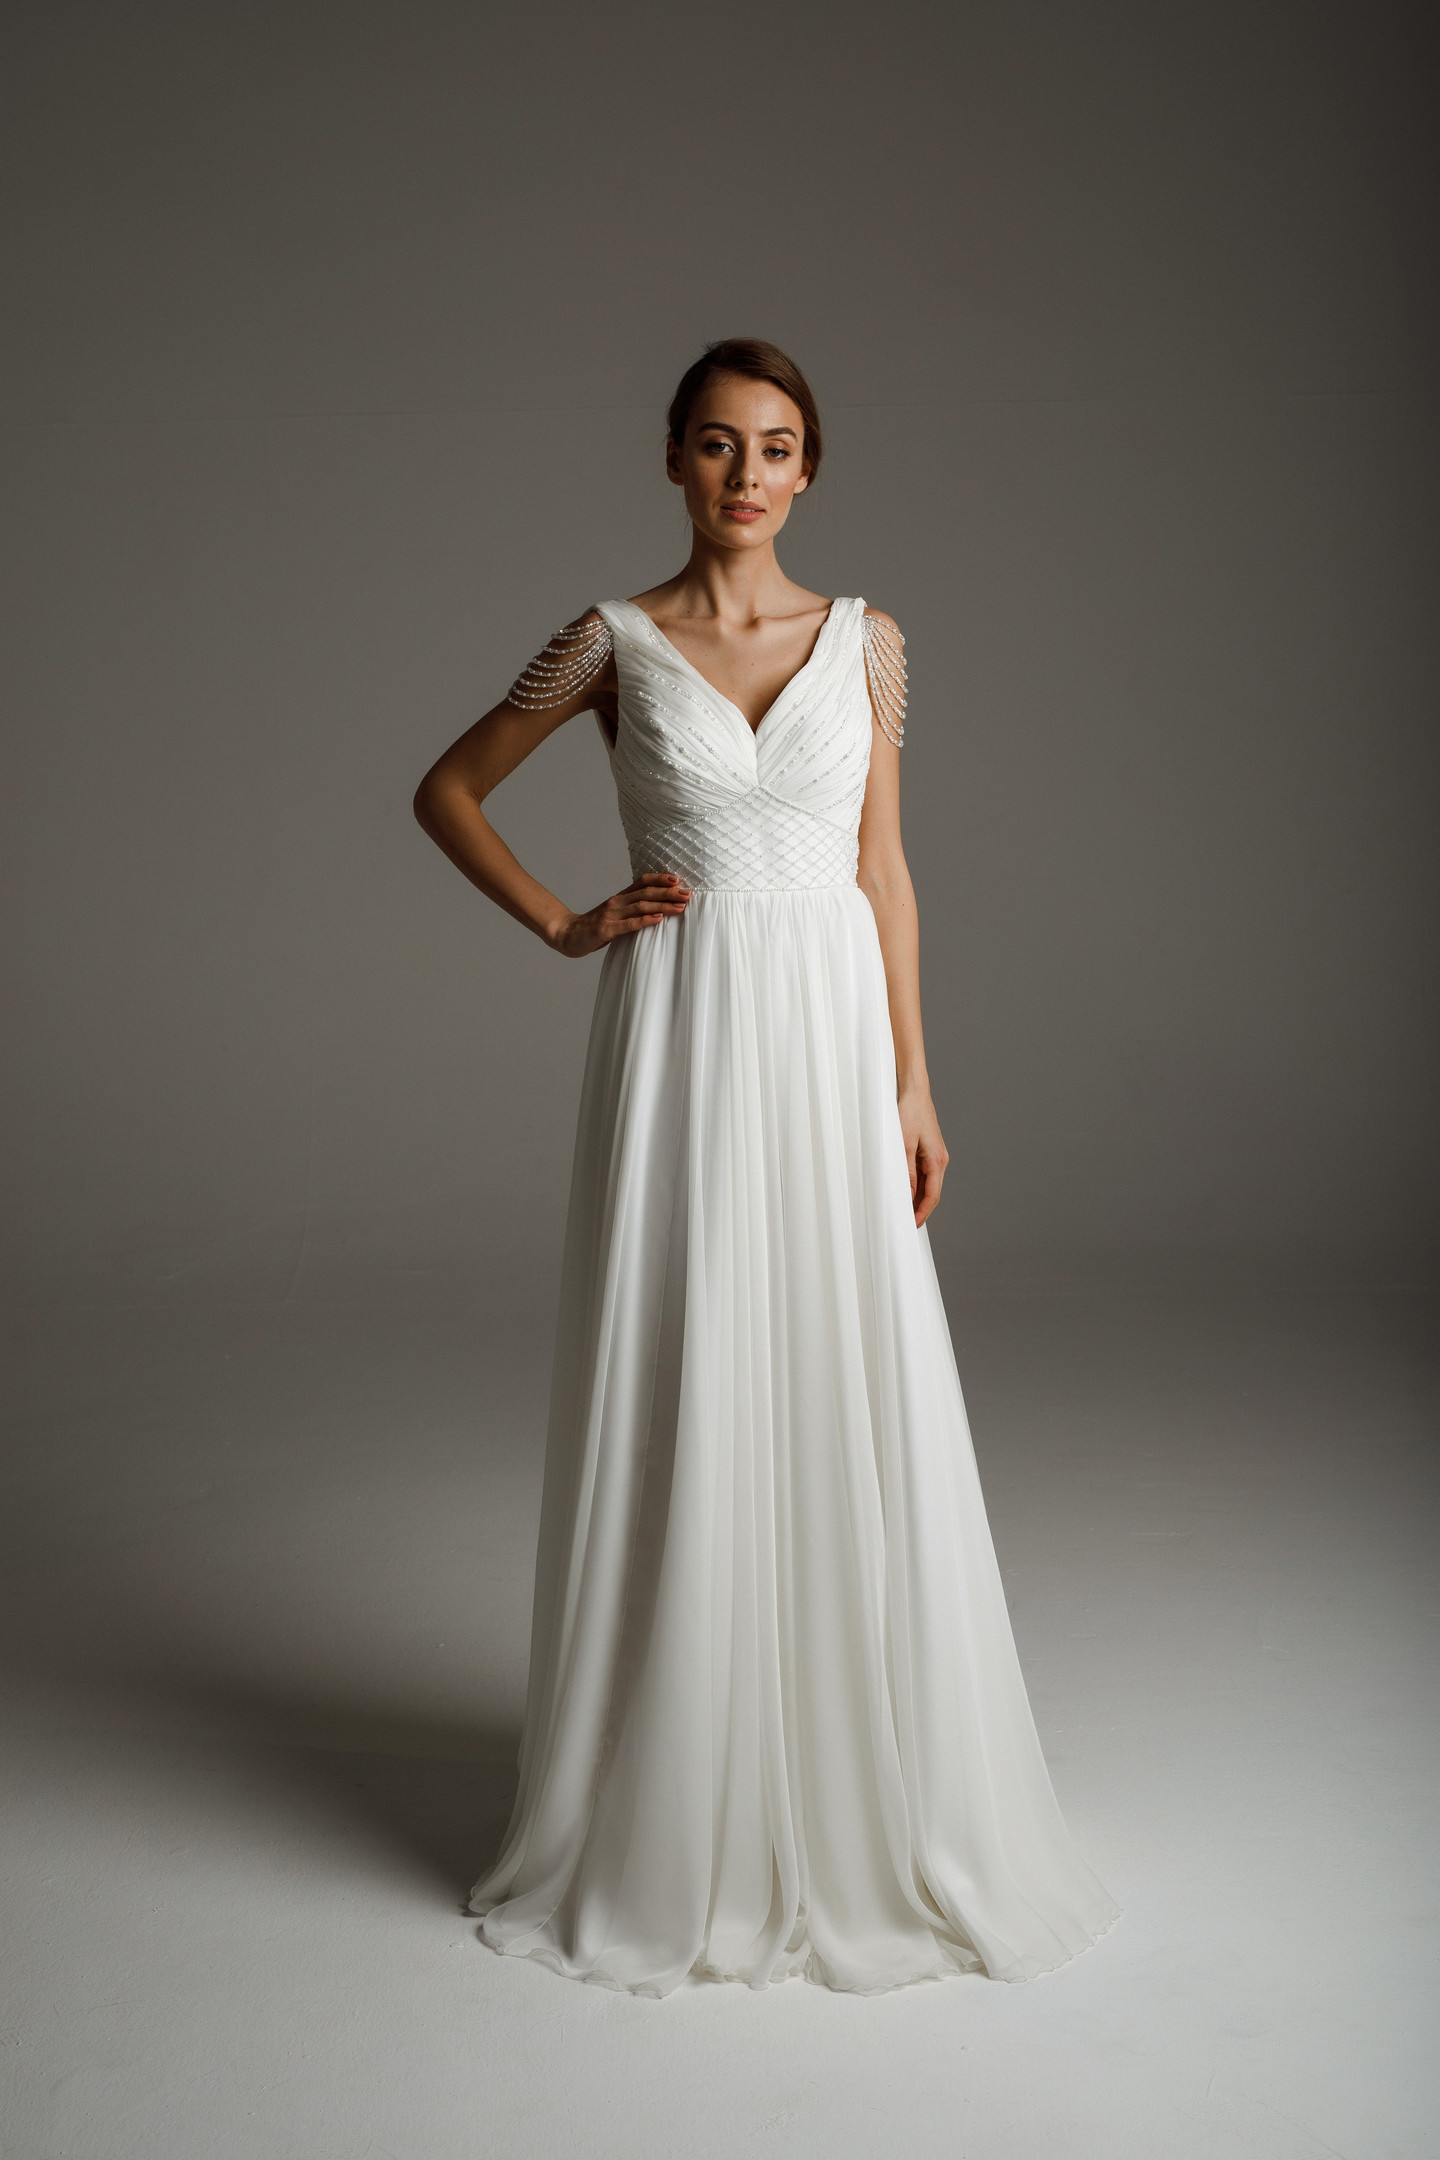 Olivia gown, 2020, couture, dress, bridal, off-white, chiffon, embroidery, A-line